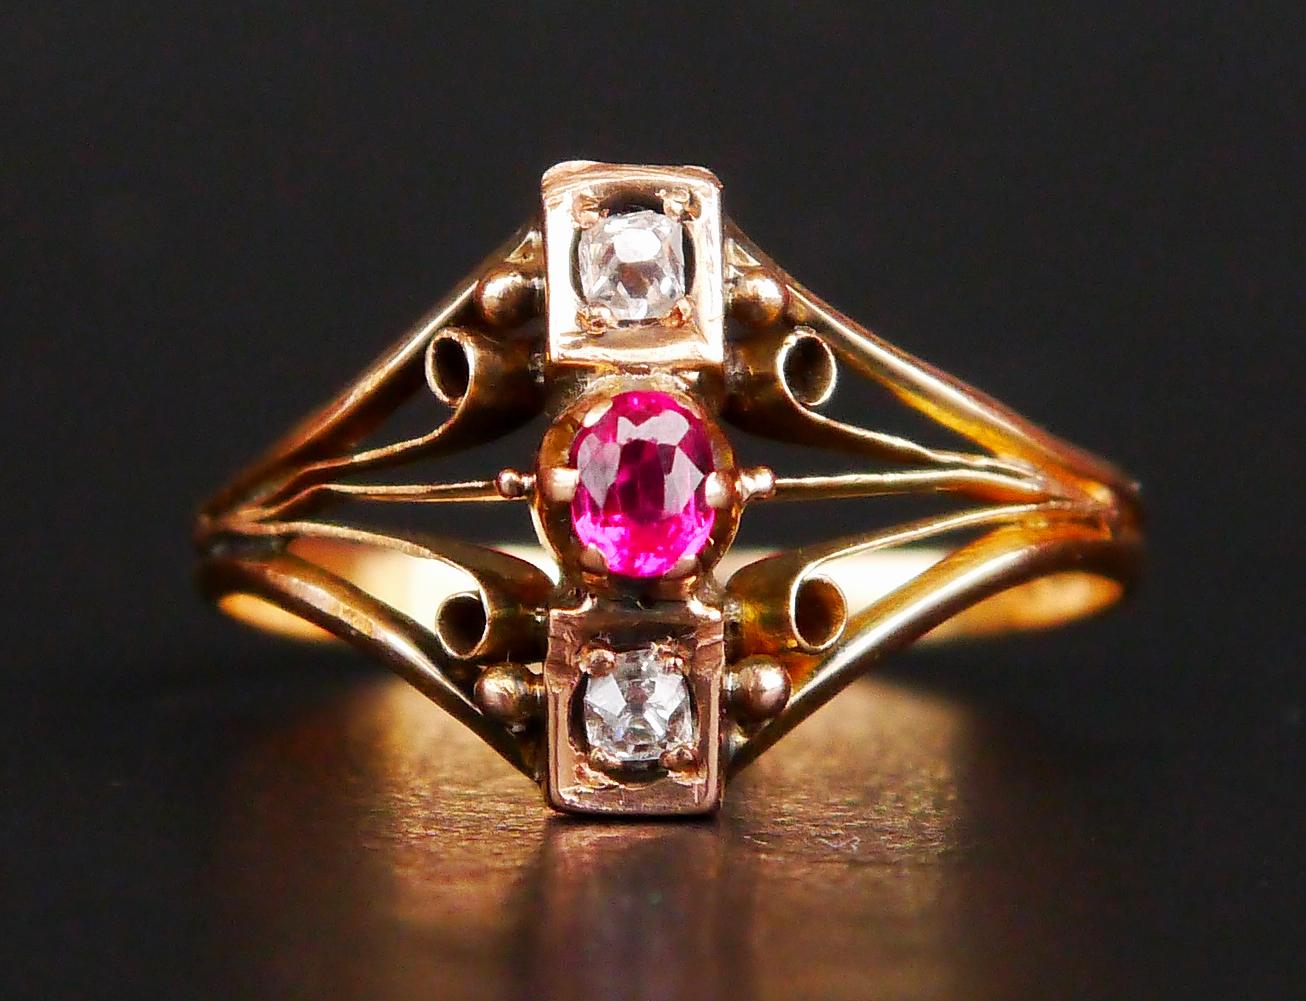 Russian Imperial period Ring with openwork shoulders featuring one claw set old oval cut Ruby and two bezel set old cushion cut Diamonds.

Made in Imperial Russia ca. late XIX - early XX cent. Hallmarked with Imperial Russian 56 hallmarks used